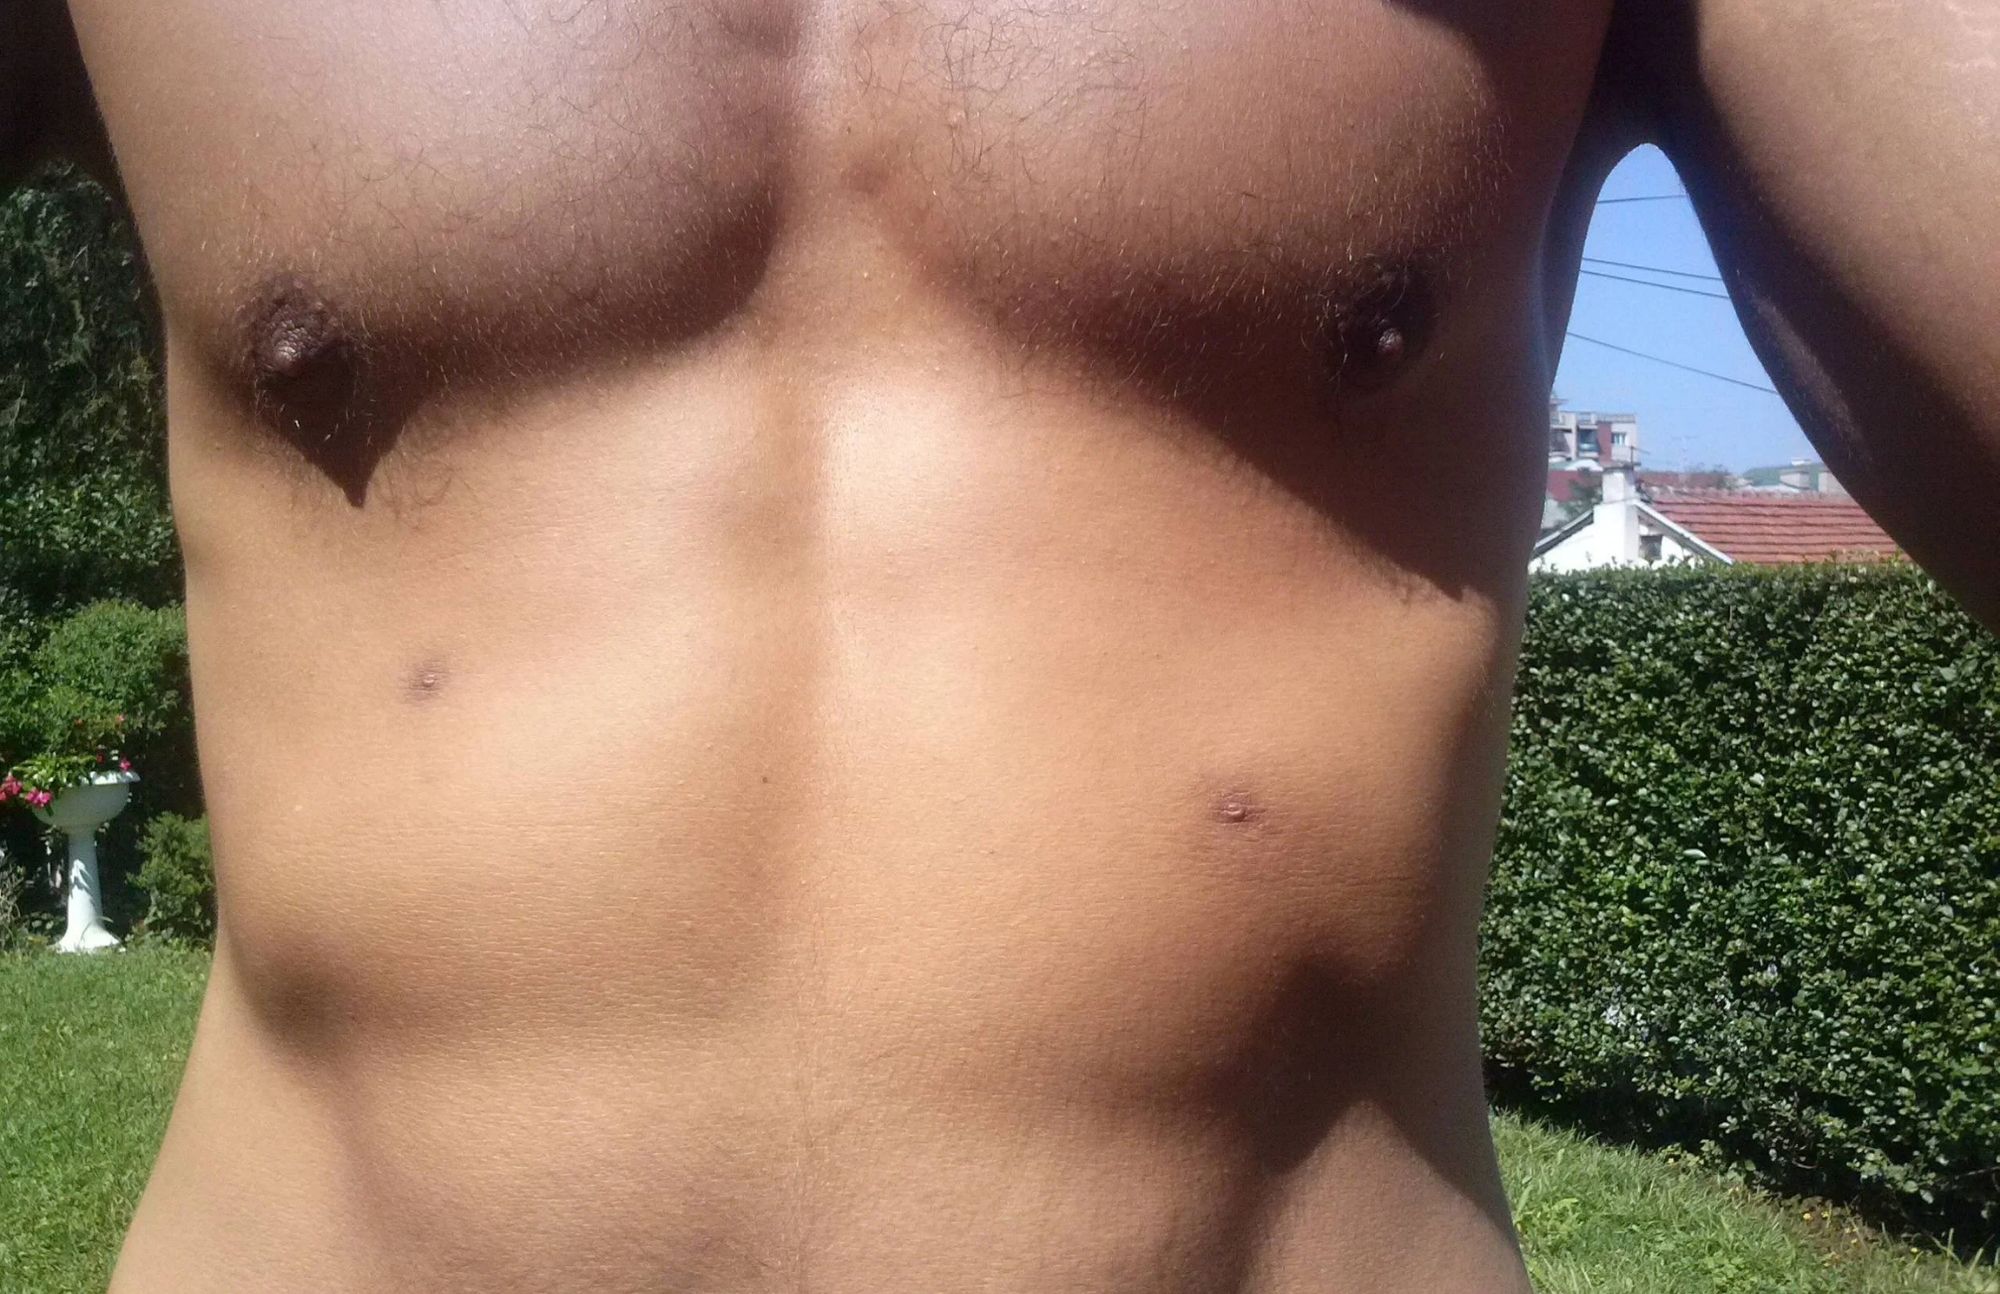 A man showing his two nipples and an extra pair of small nipples are located in his abdomen